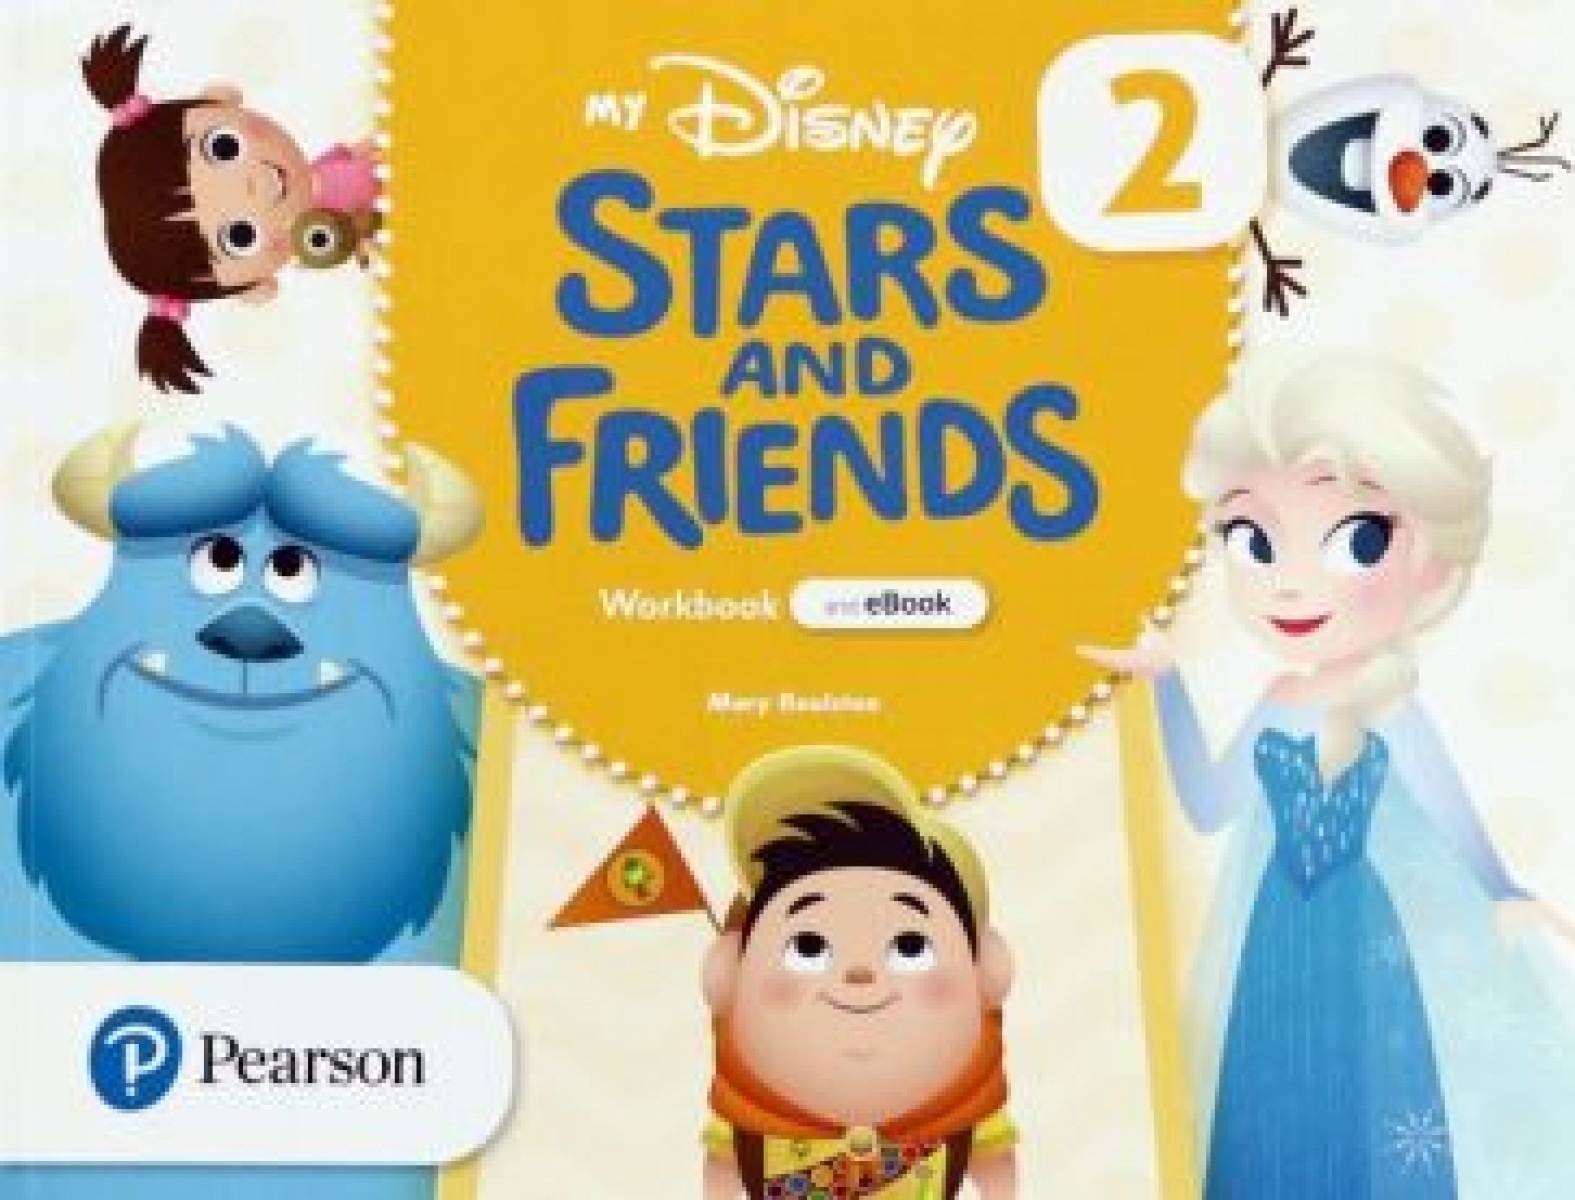 Roulston Mary My Disney Stars and Friends. Level 2. Workbook with eBook 